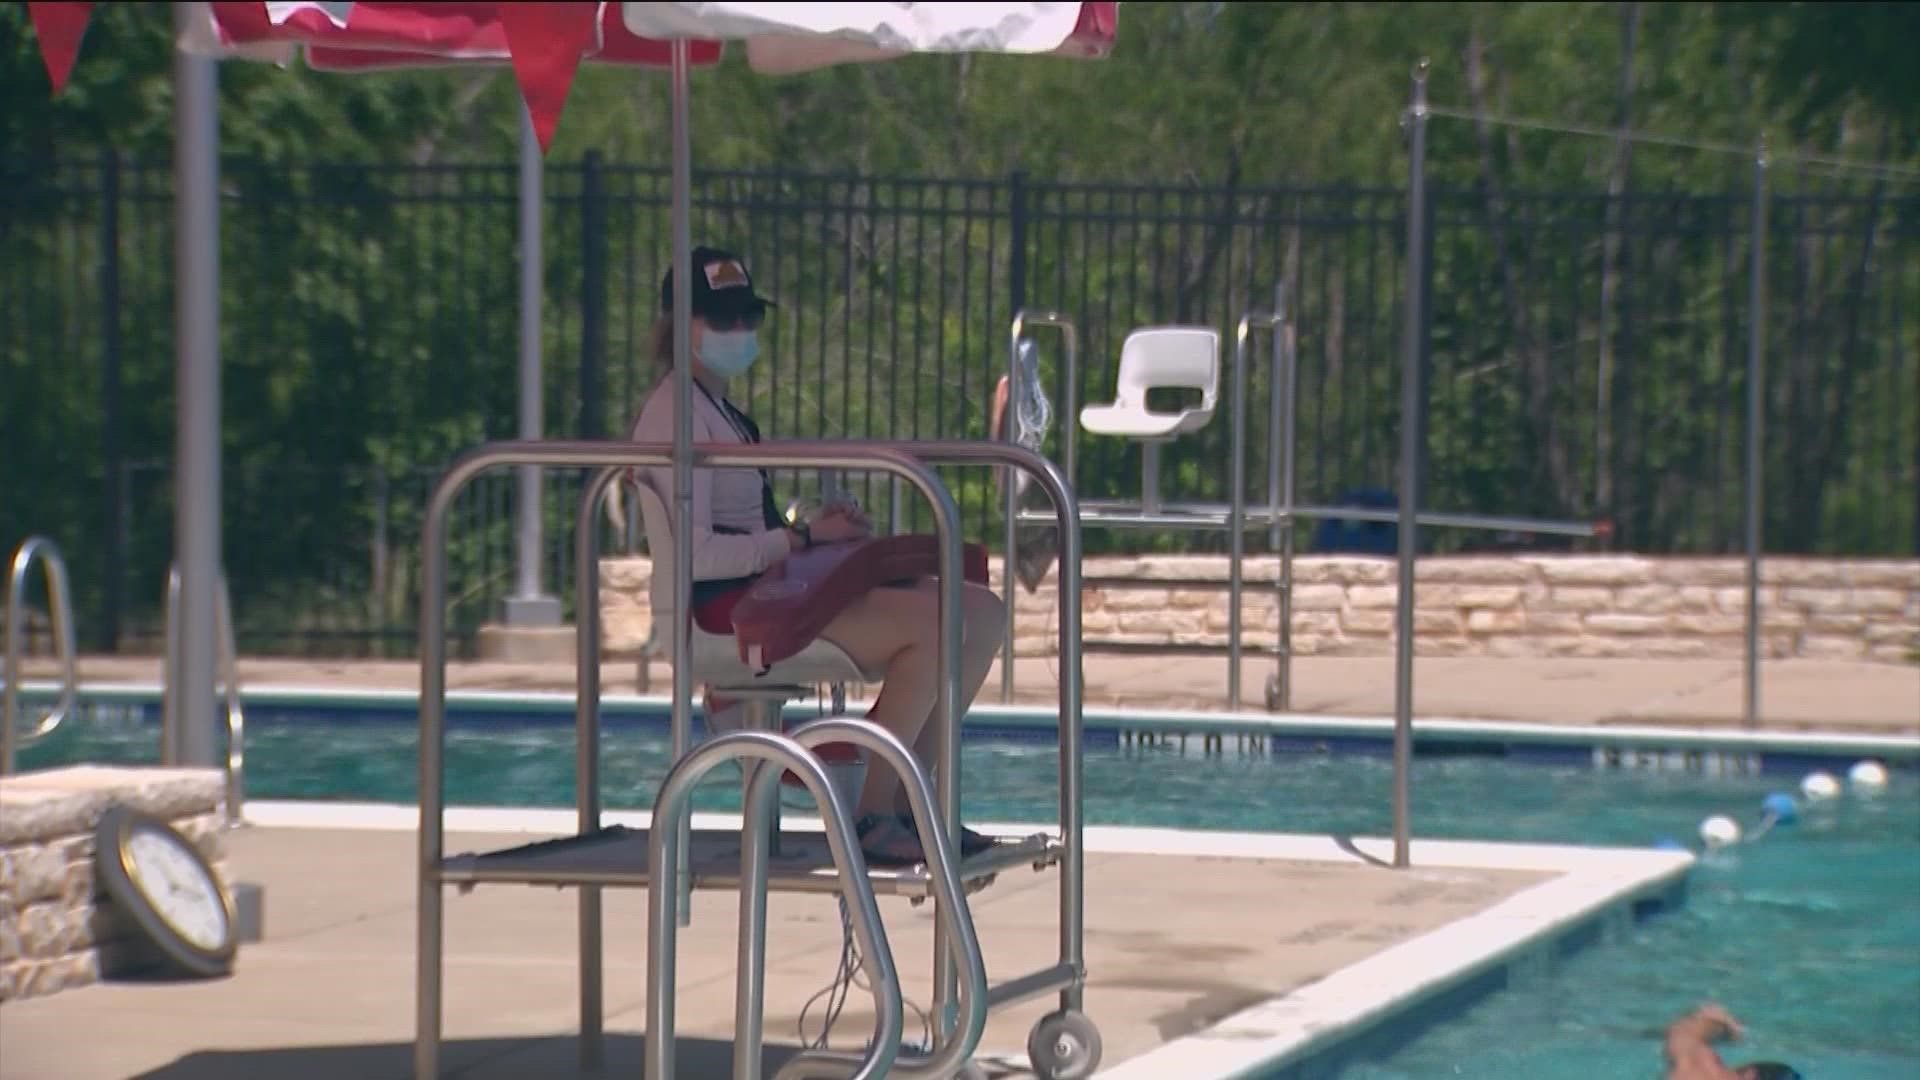 The City of Austin is already starting to hire lifeguards for next spring.